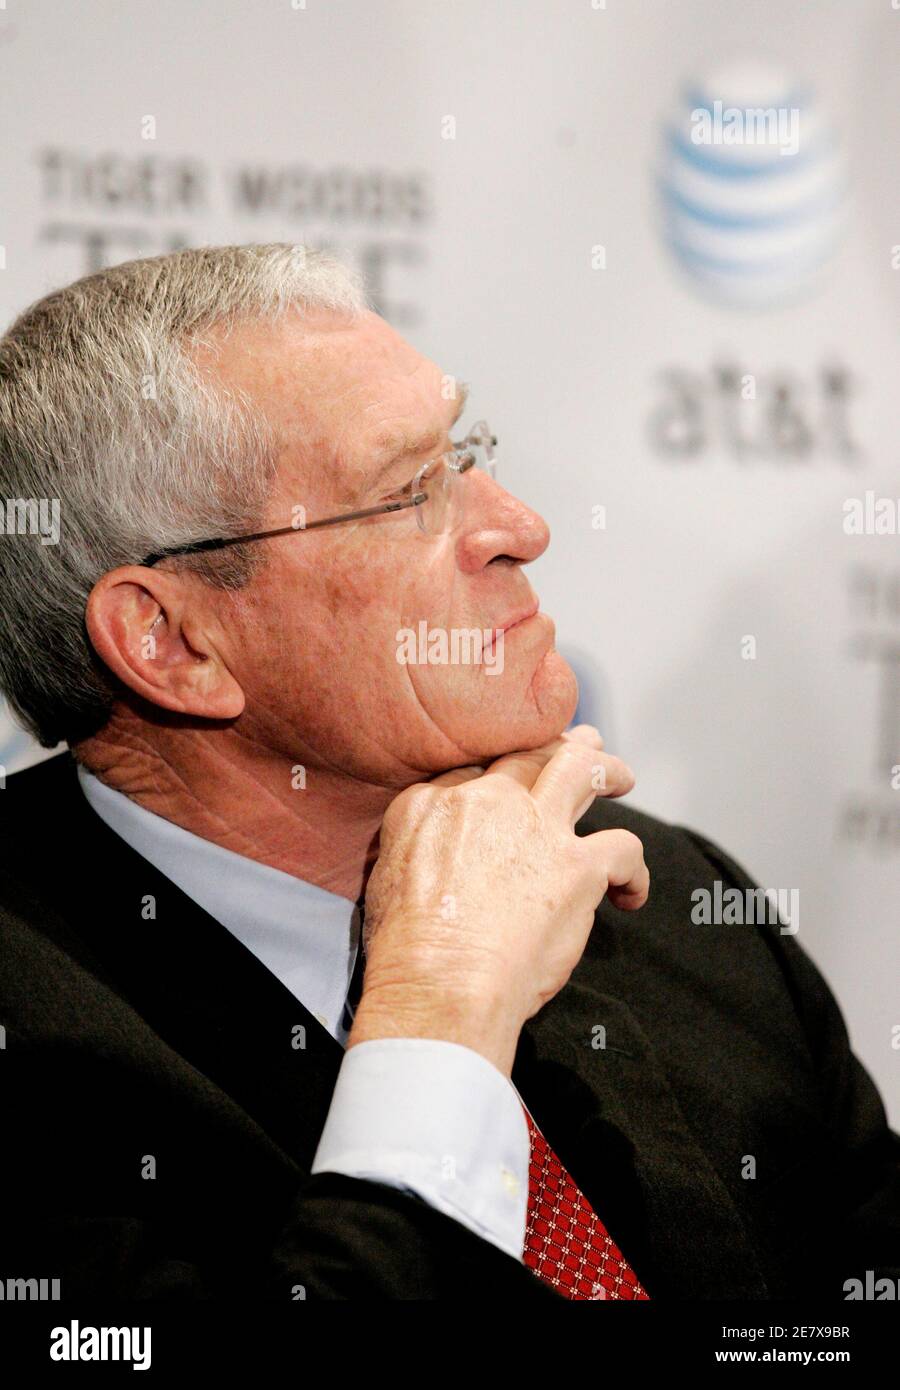 AT&T Chairman and CEO Edward Whitacre, Jr. listens during a news conference in Washington March 7, 2007. Whitacre was on hand for the announcement of the new AT&T National golf tournament that Tiger Woods will host and play in. The new event will have a six million dollar purse that will benefit the Tiger Woods Foundation and is scheduled to be played July 2-8 at the Congressional Country Club in suburban Maryland.        REUTERS/Gary Cameron  (UNITED STATES) Stock Photo